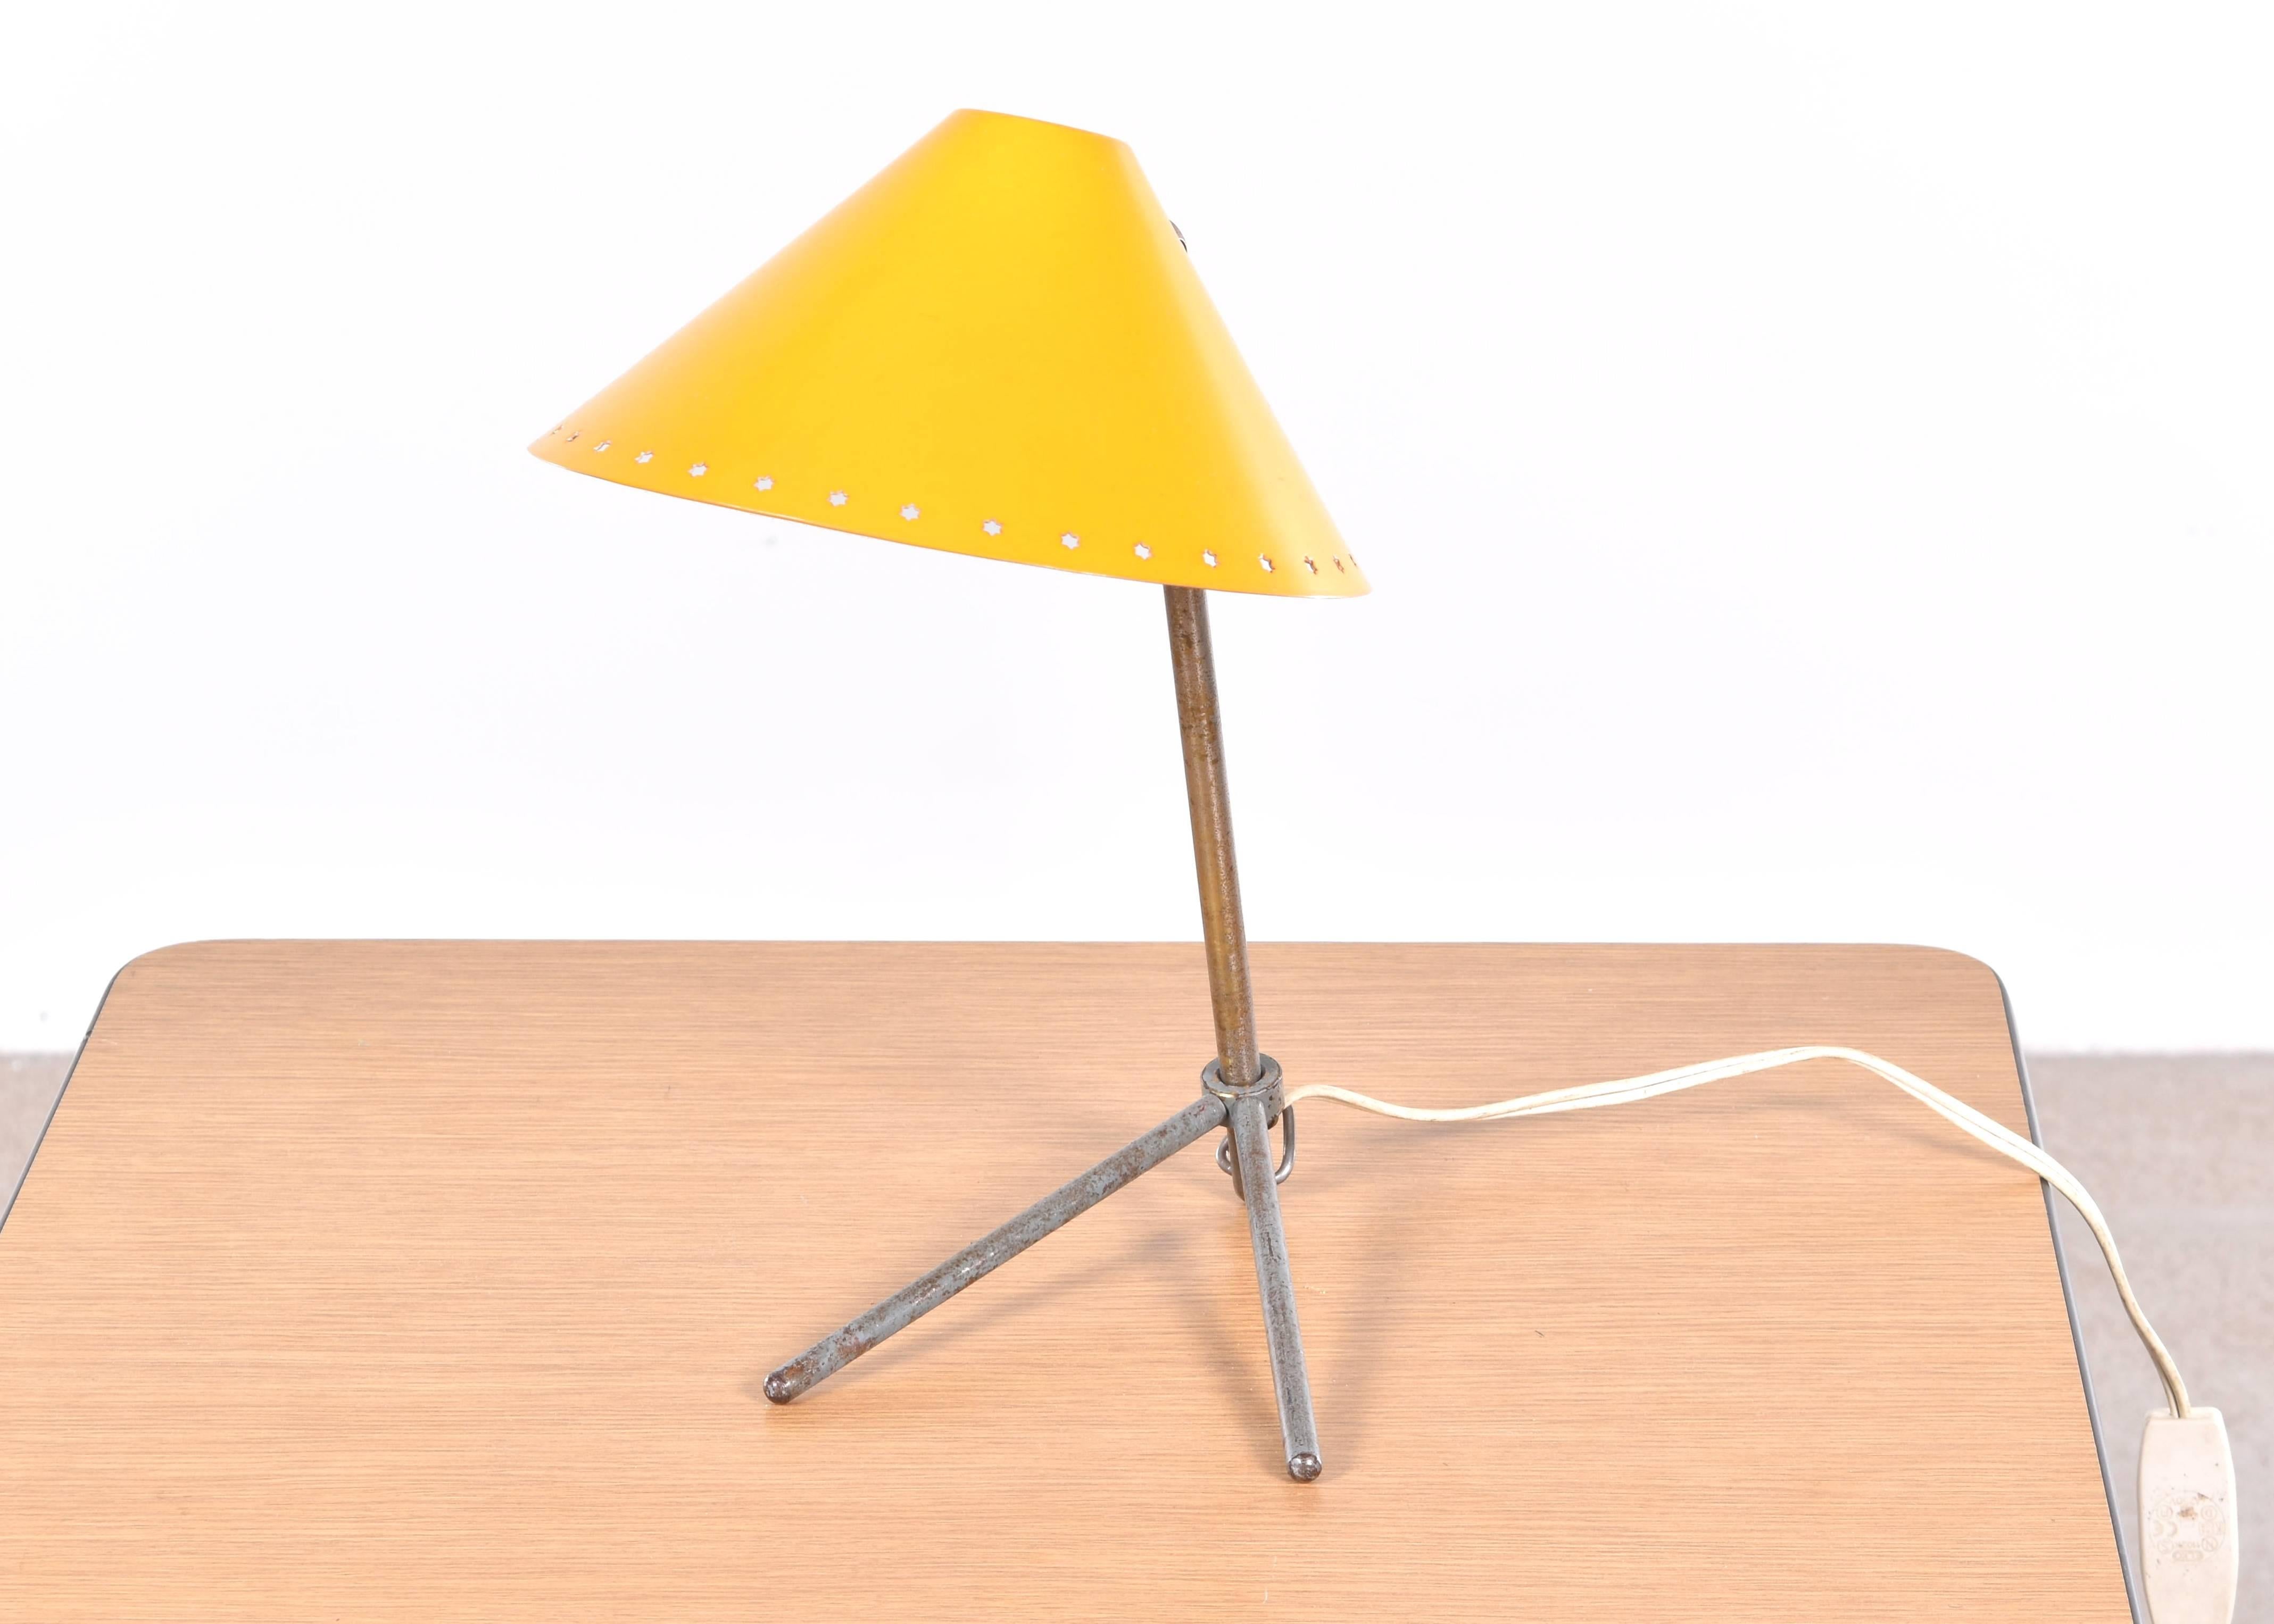 Mid-Century Modern Yellow Pinocchio Lamp by H. Busquet for Hala Zeist, Netherlands